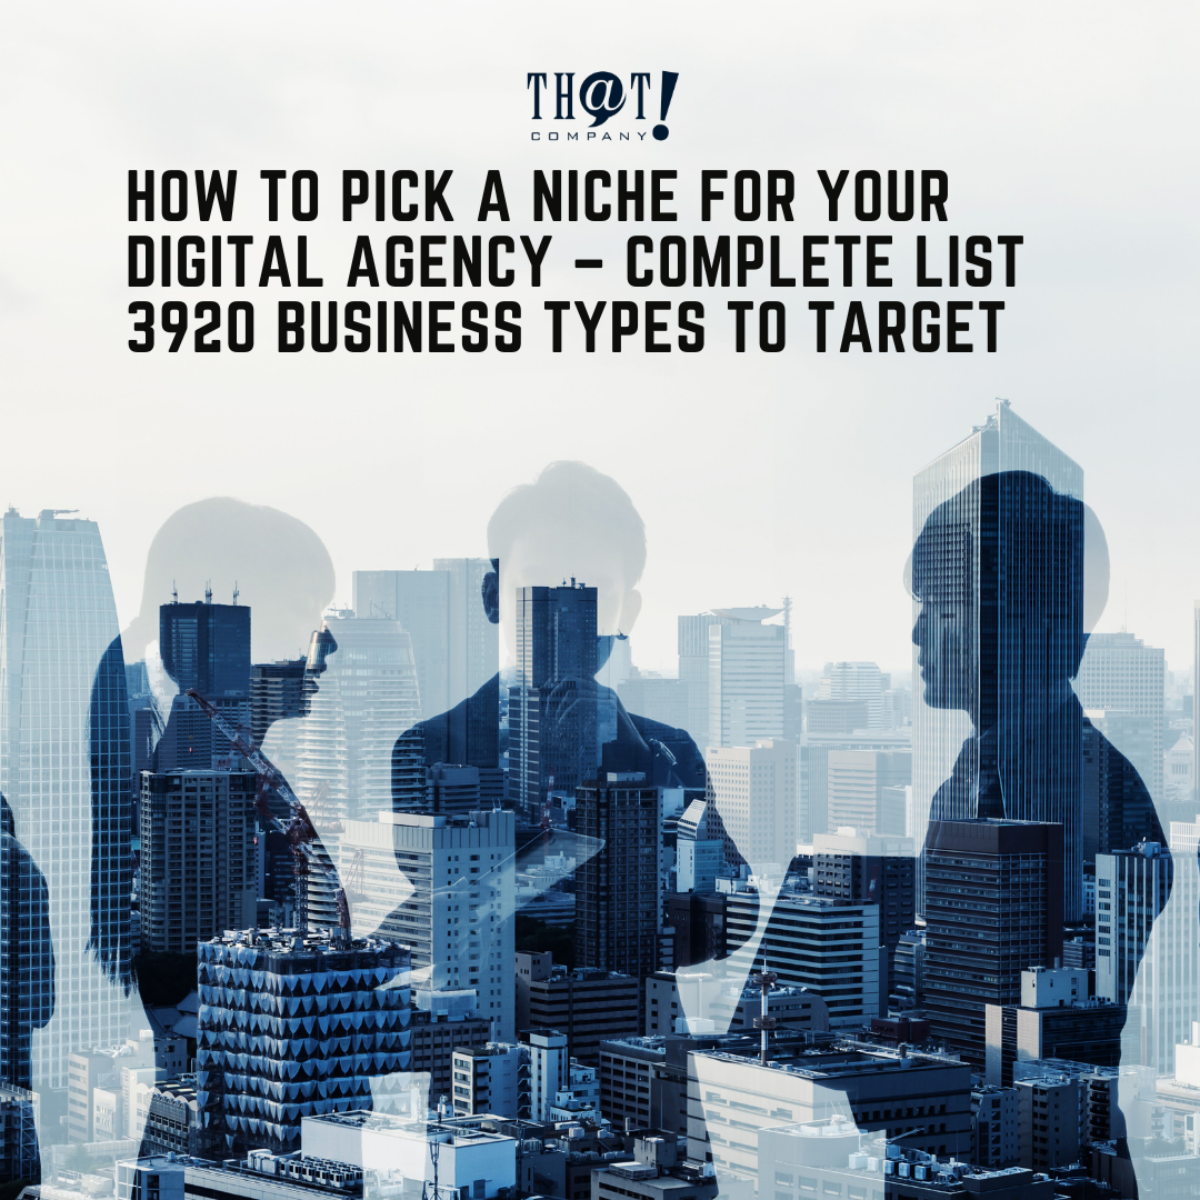 Pick a Niche For Your Digital Agency